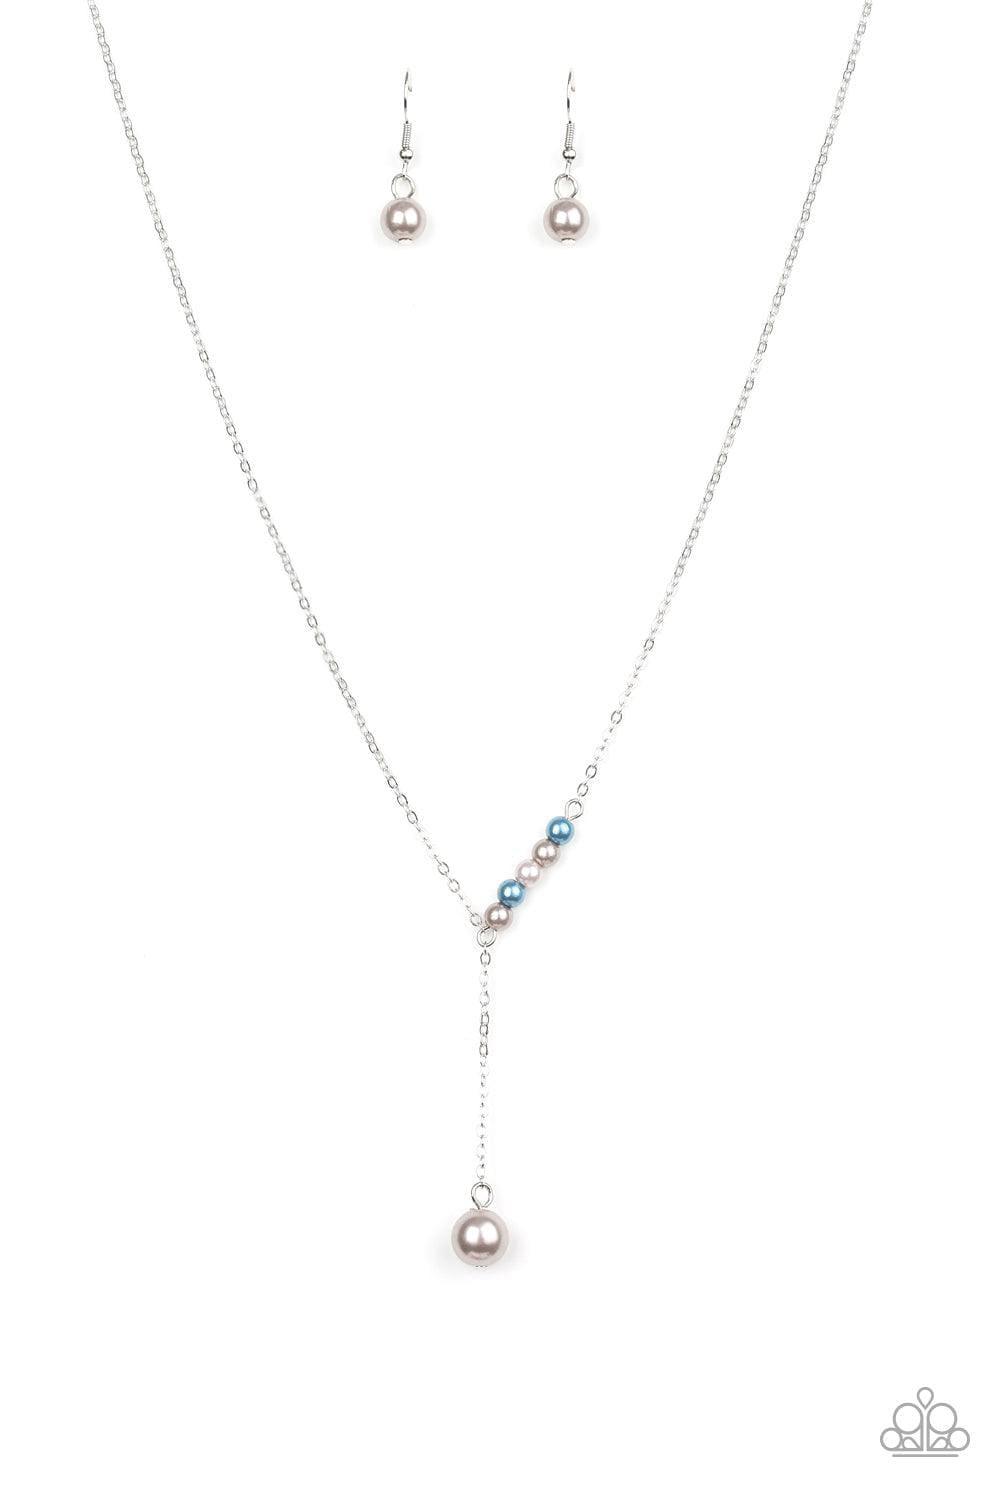 Paparazzi Accessories - Timeless Taste - Multicolor Dainty Necklace - Bling by JessieK